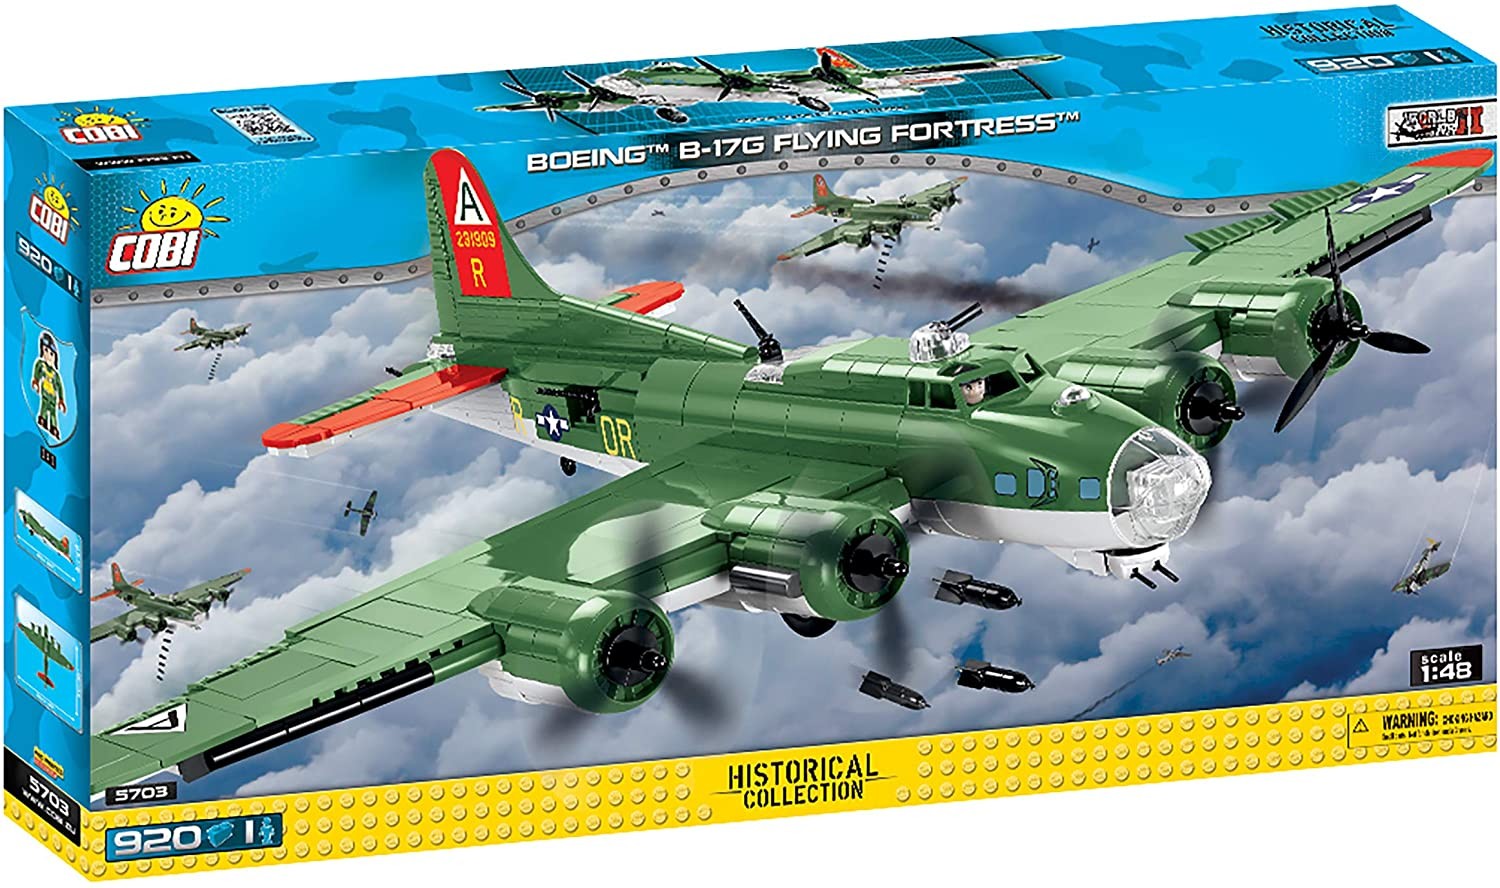 5703 - Boeing™ B-17G Flying Fortress™